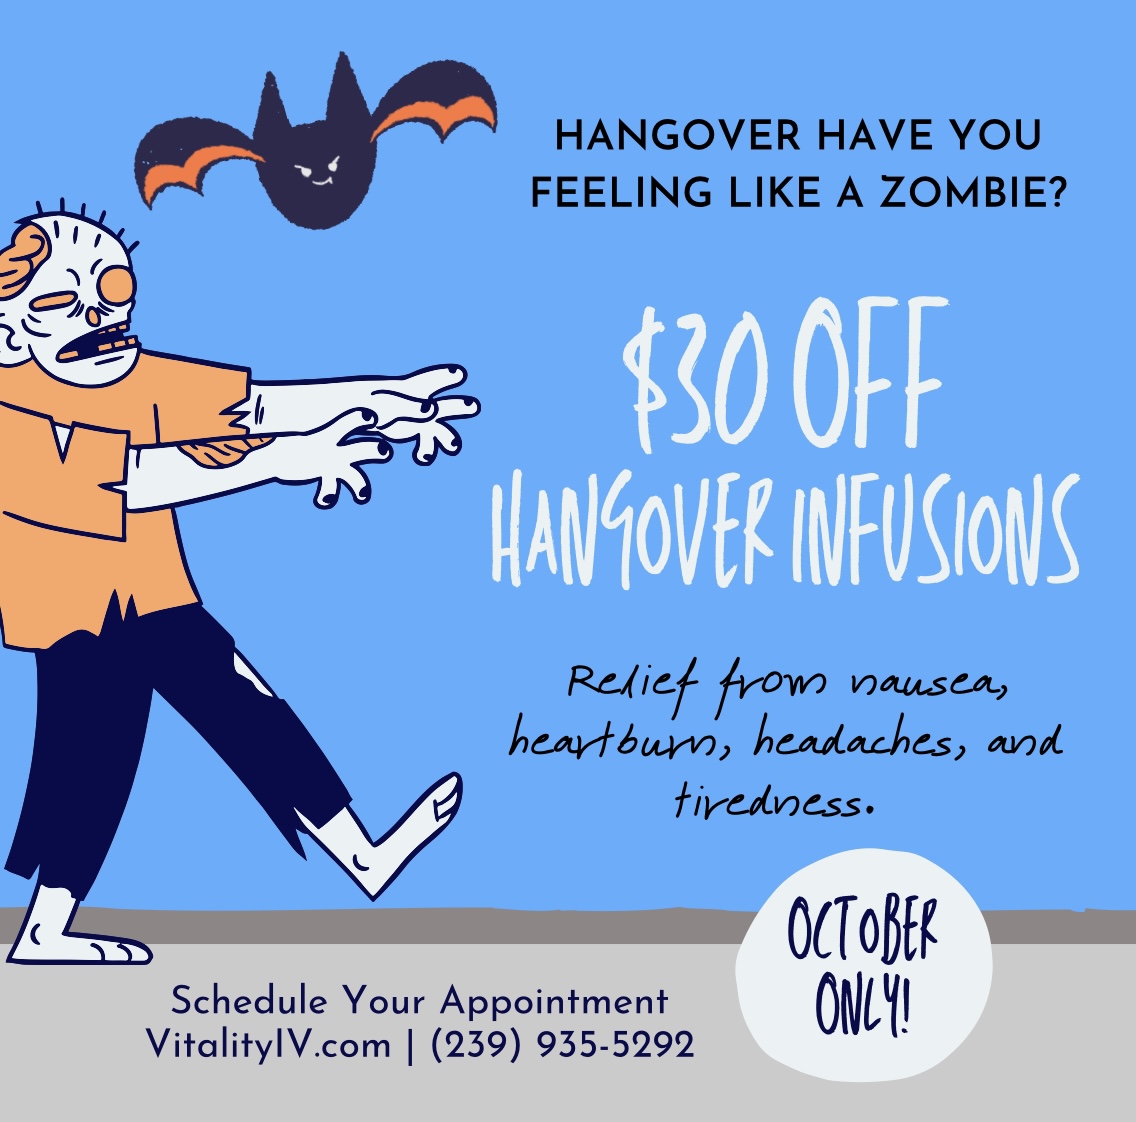 $30 off hangover infusions